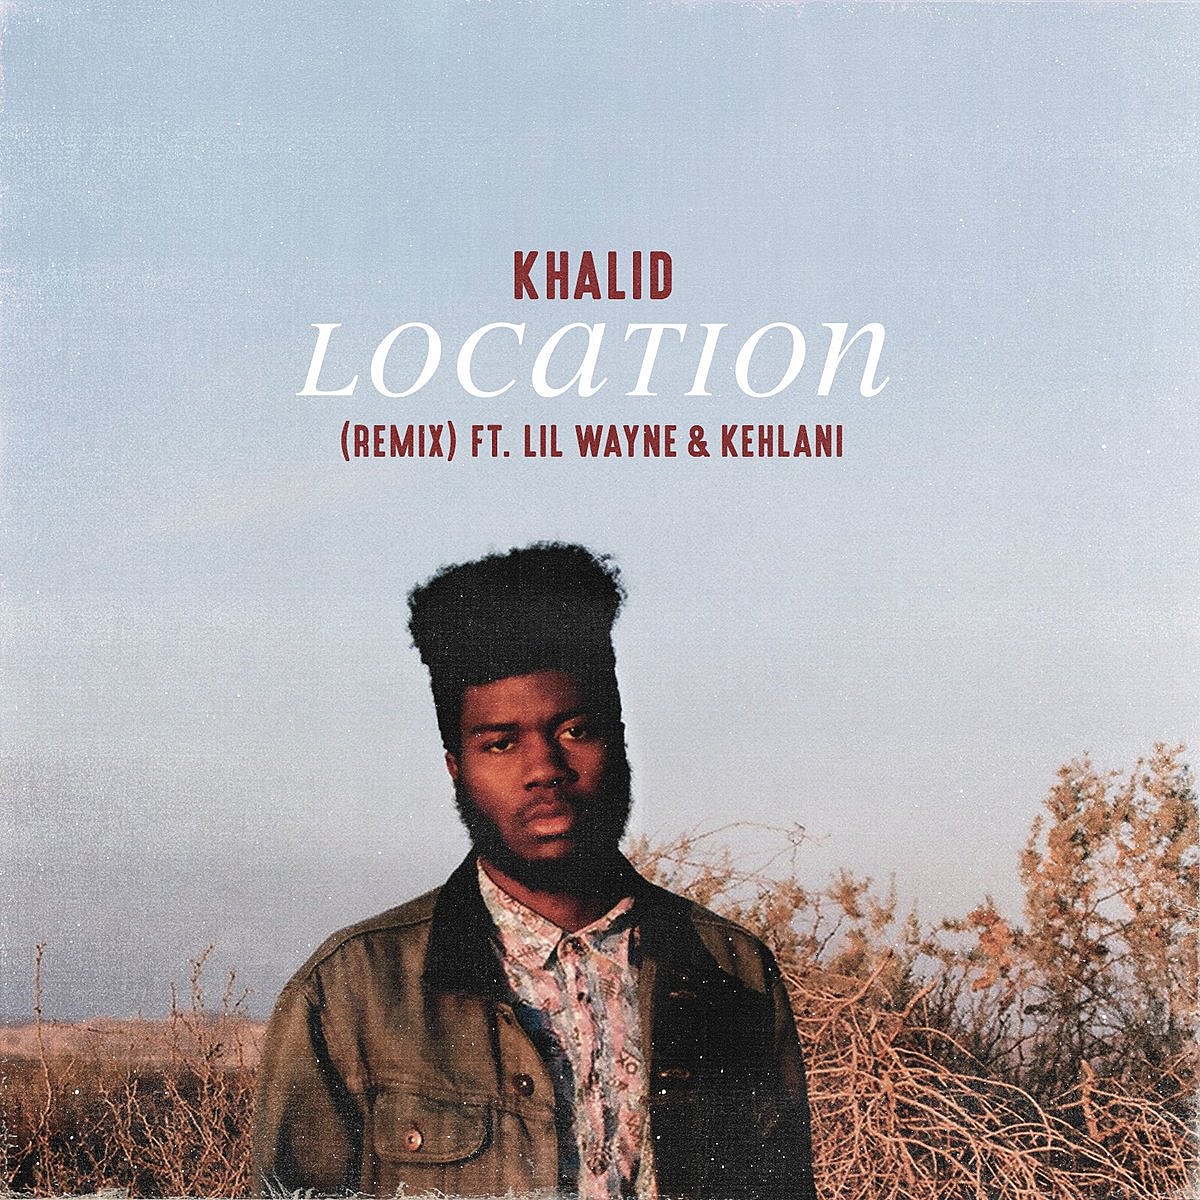 Download Location By Khalid